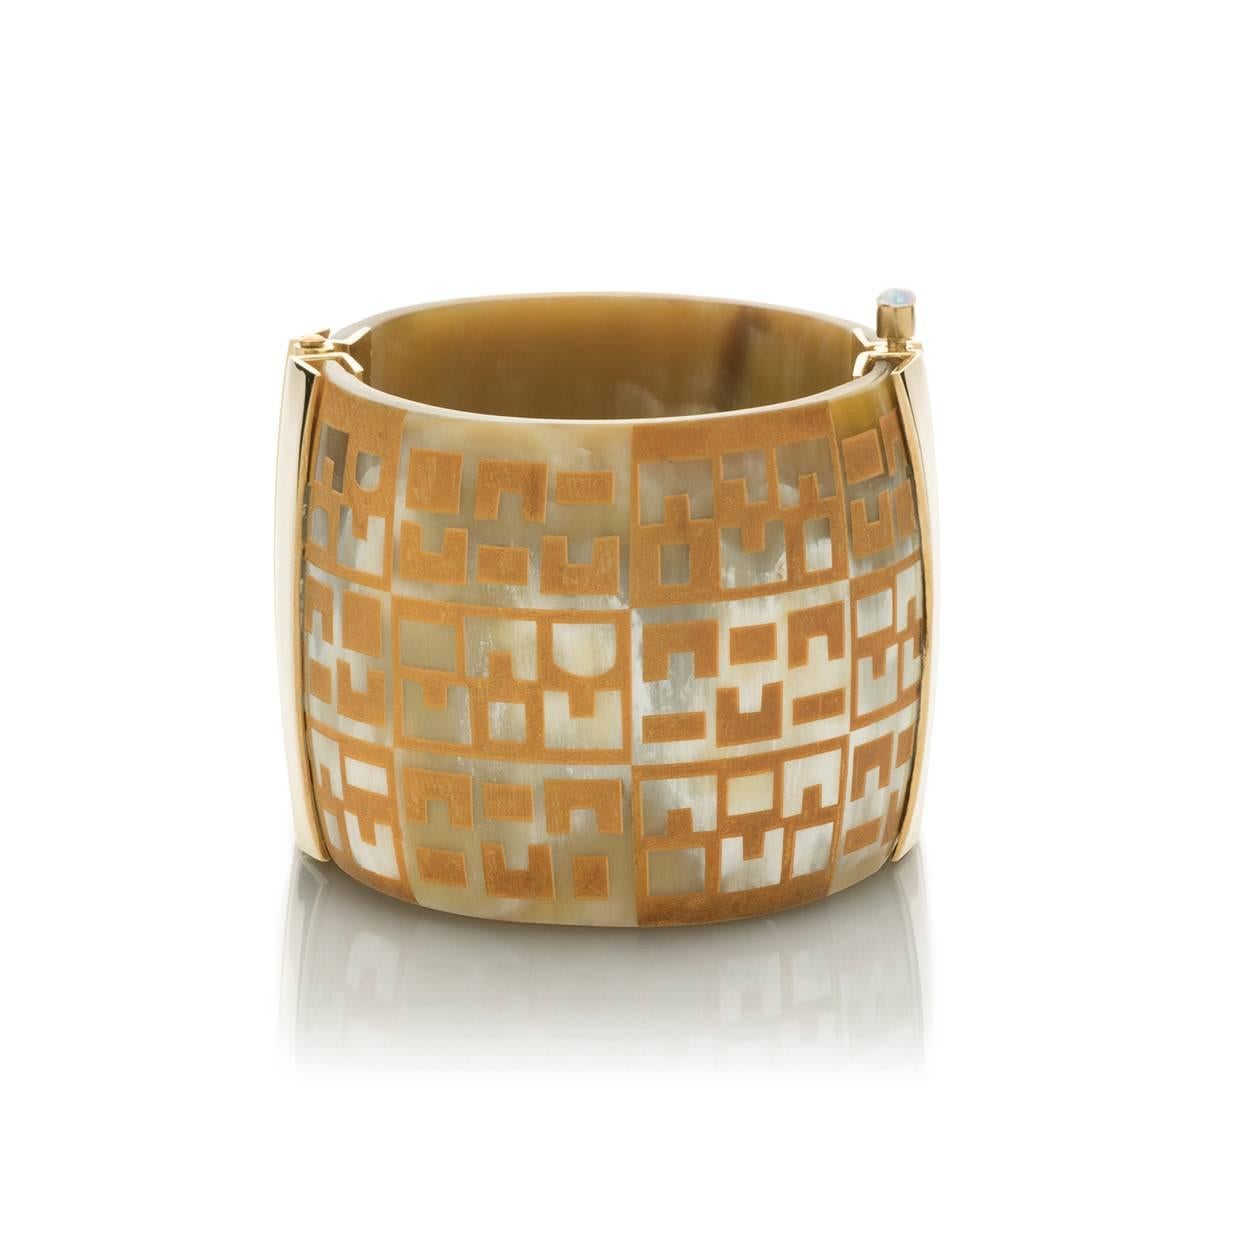 This unique cuff is handmade from African cow horn and engraved with African textile inspired design. The intricate pin-clasp is set with Ethiopian fire opal. 

Hand carved by artisans in Kenya; finished to the finest quality by hand in London. Each